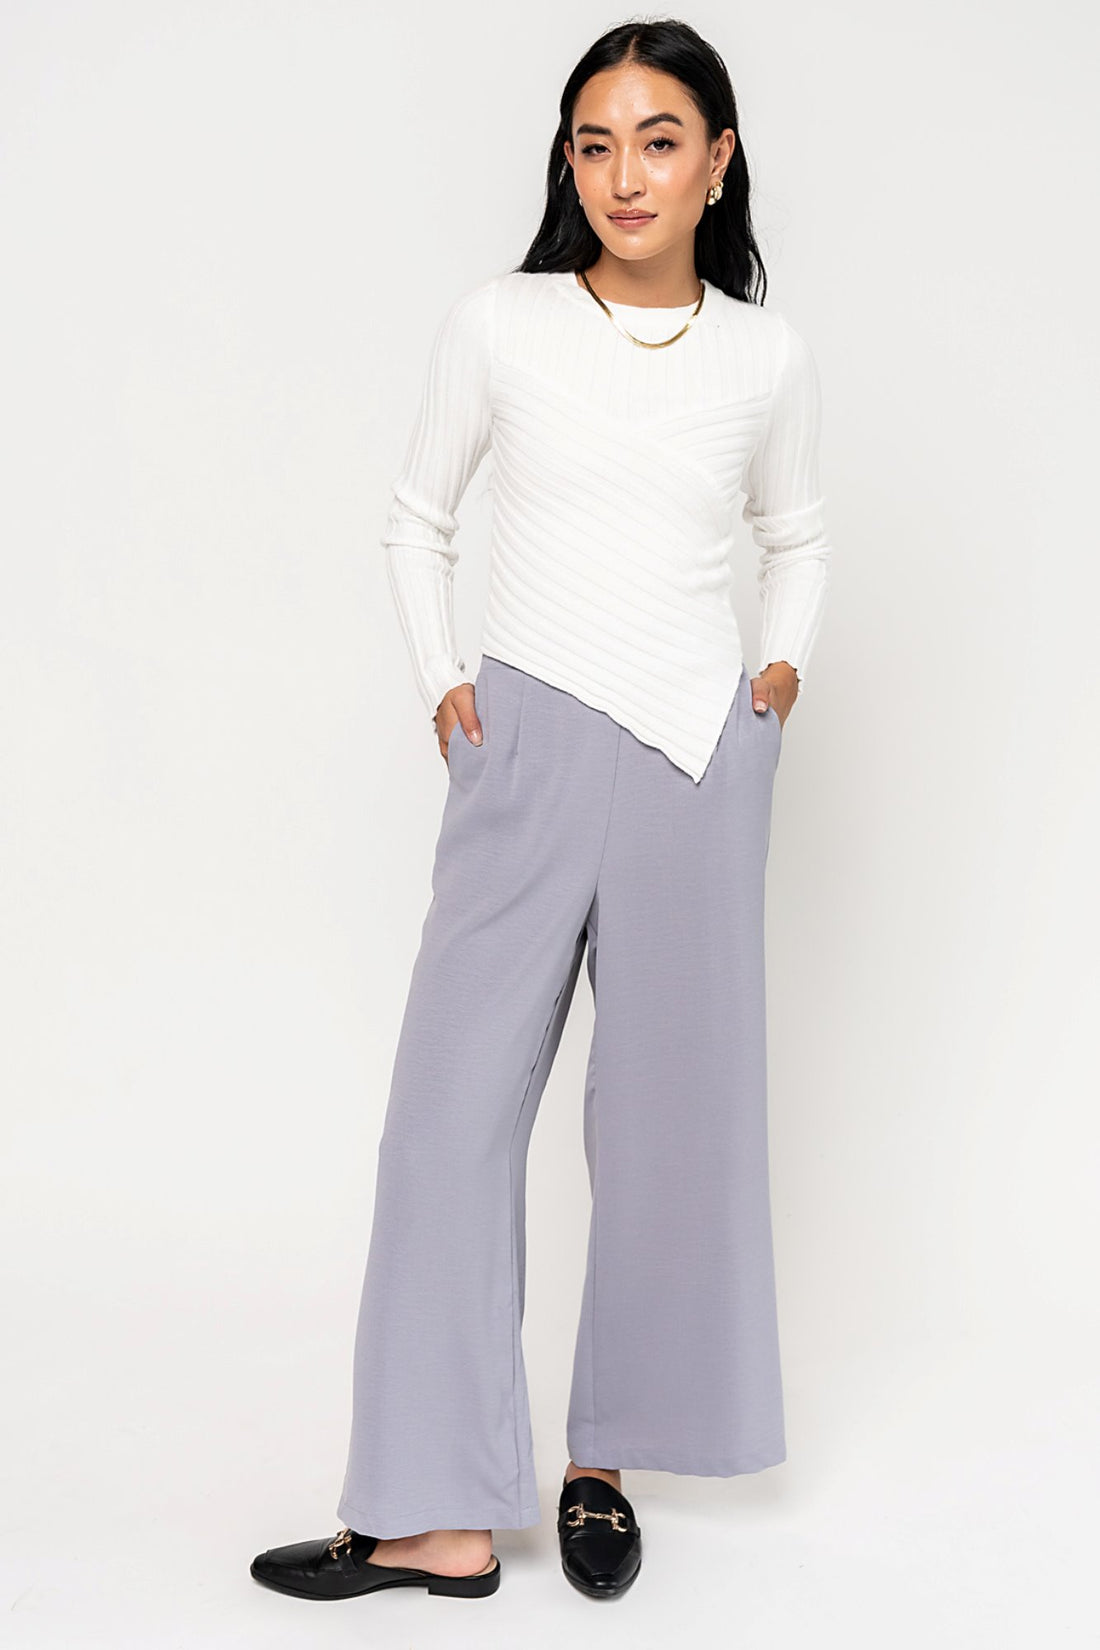 HOLLEY GIRL - Jovie Pant in Grey (Small-XL) - FINAL SALE – Holley Girl